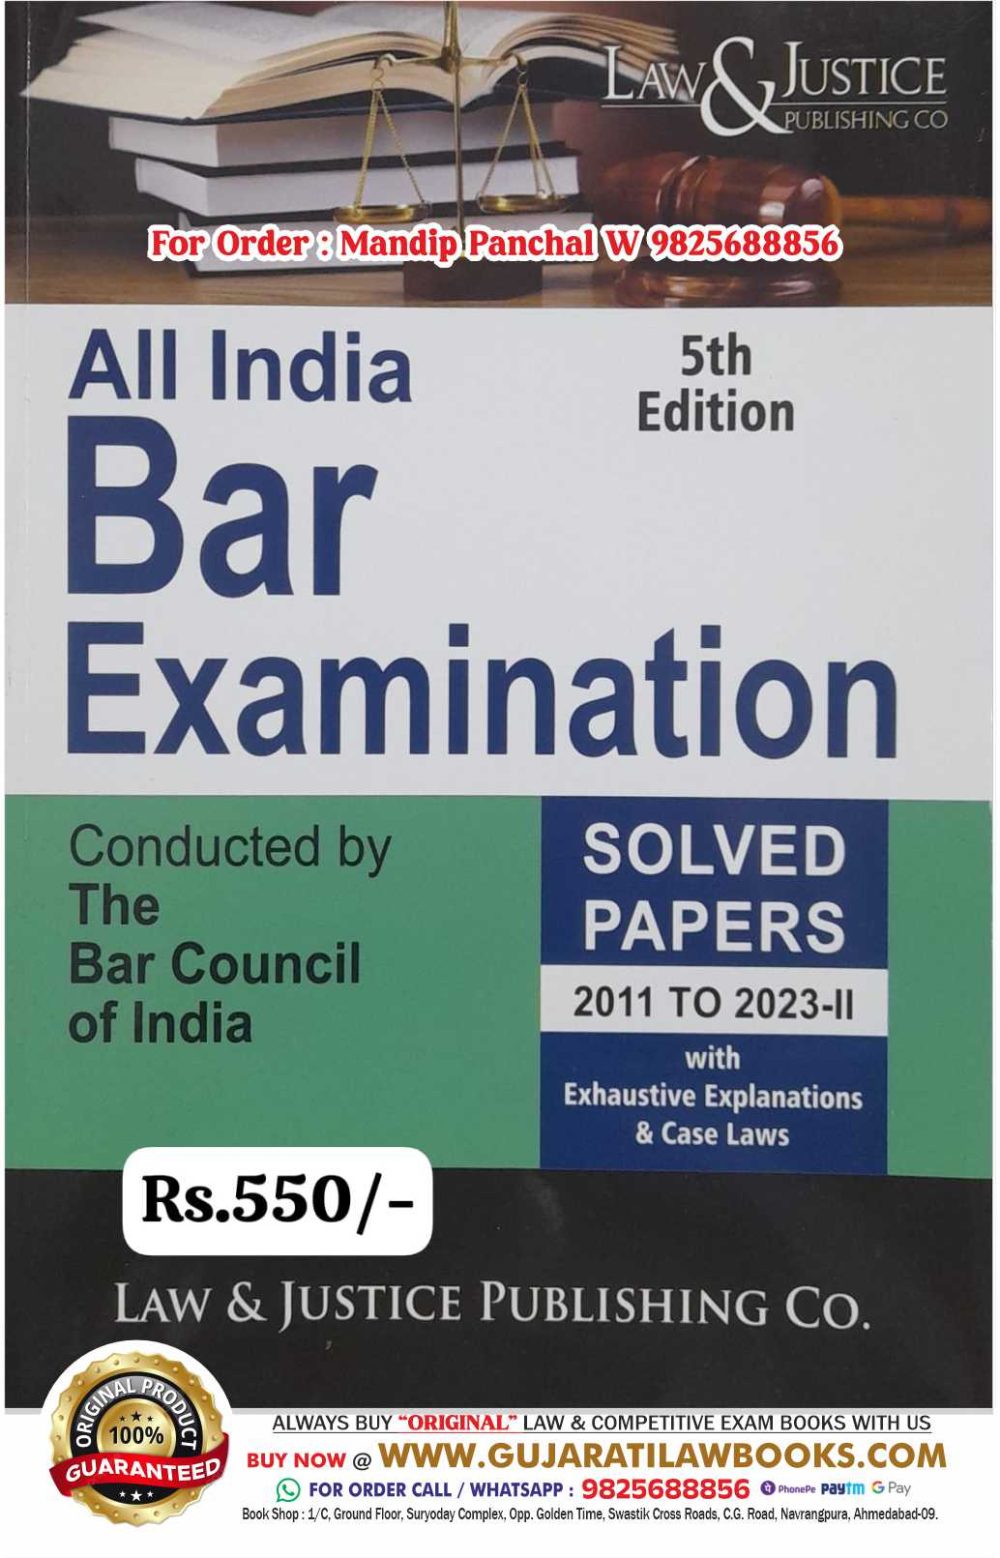 All Bar Examination - SOLVED PAPERS 2011 to 2023 - II - Latest 5th Edition 2024 Law & Justice